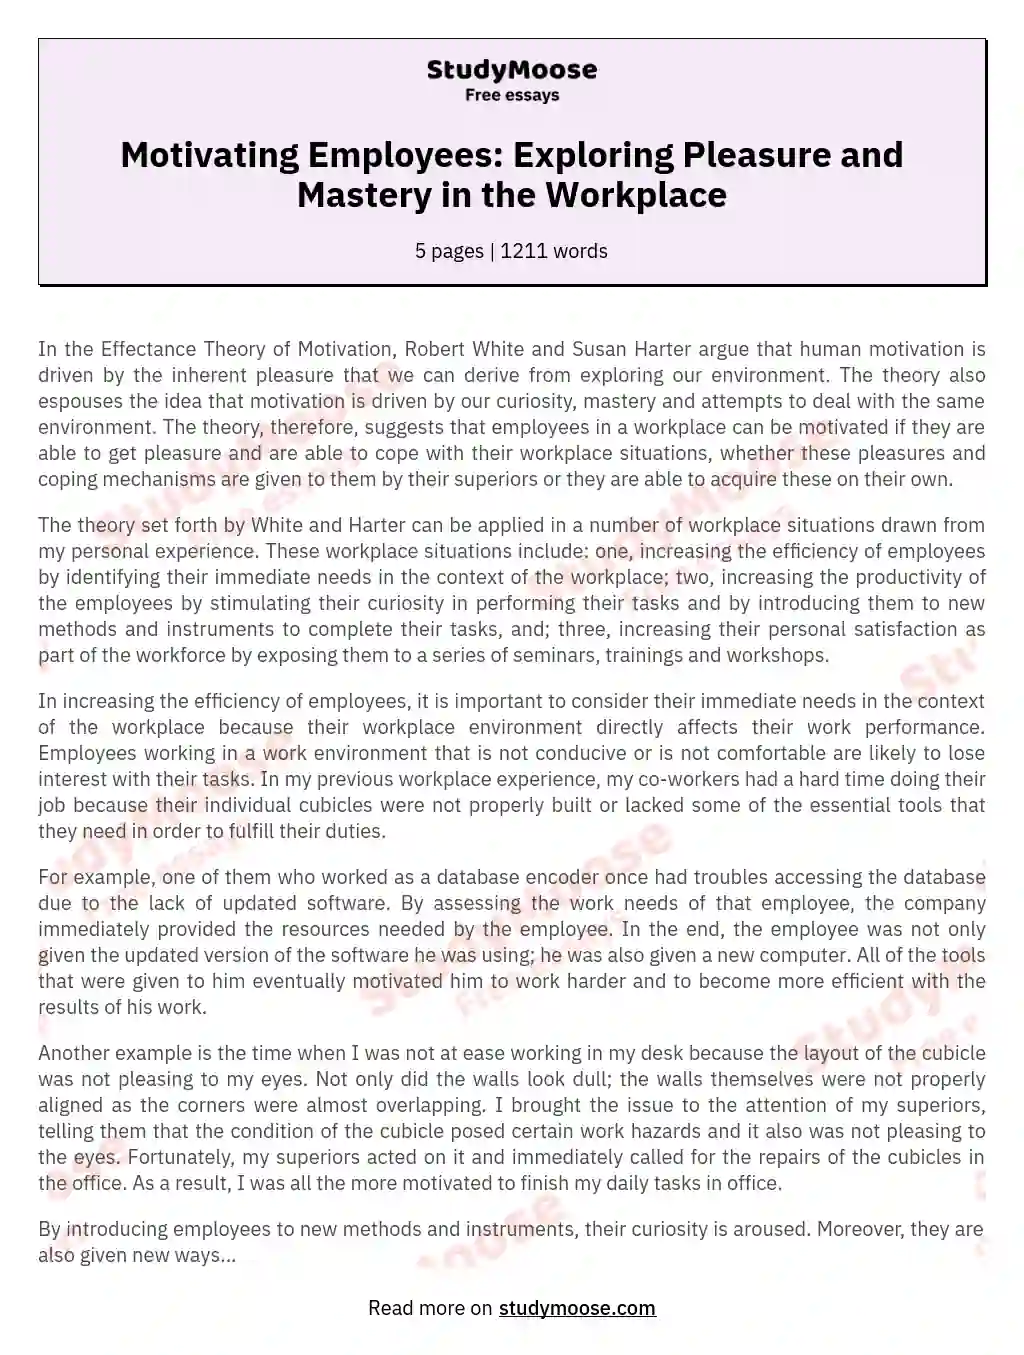 Motivating Employees: Exploring Pleasure and Mastery in the Workplace essay